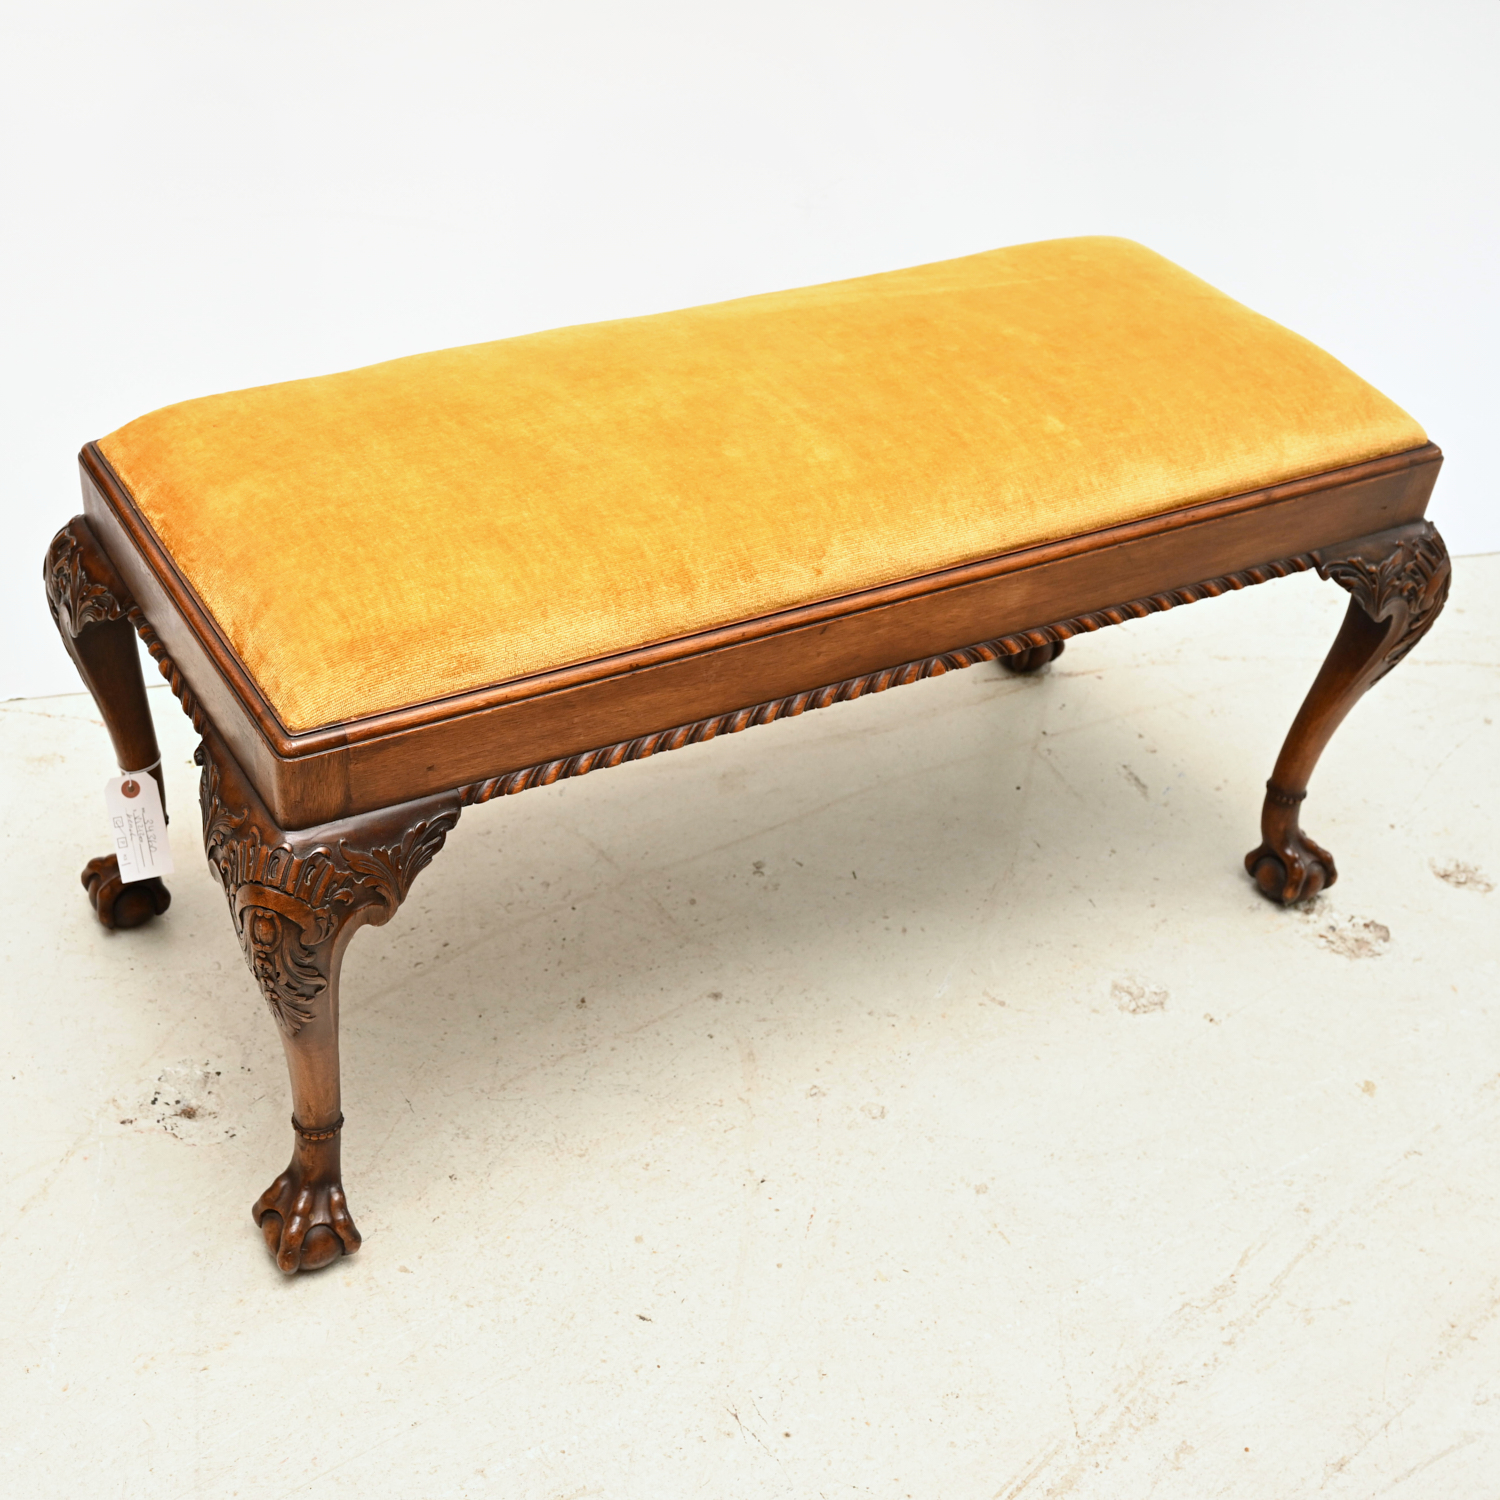 CHIPPENDALE STYLE UPHOLSTERED BENCH 2ce18c